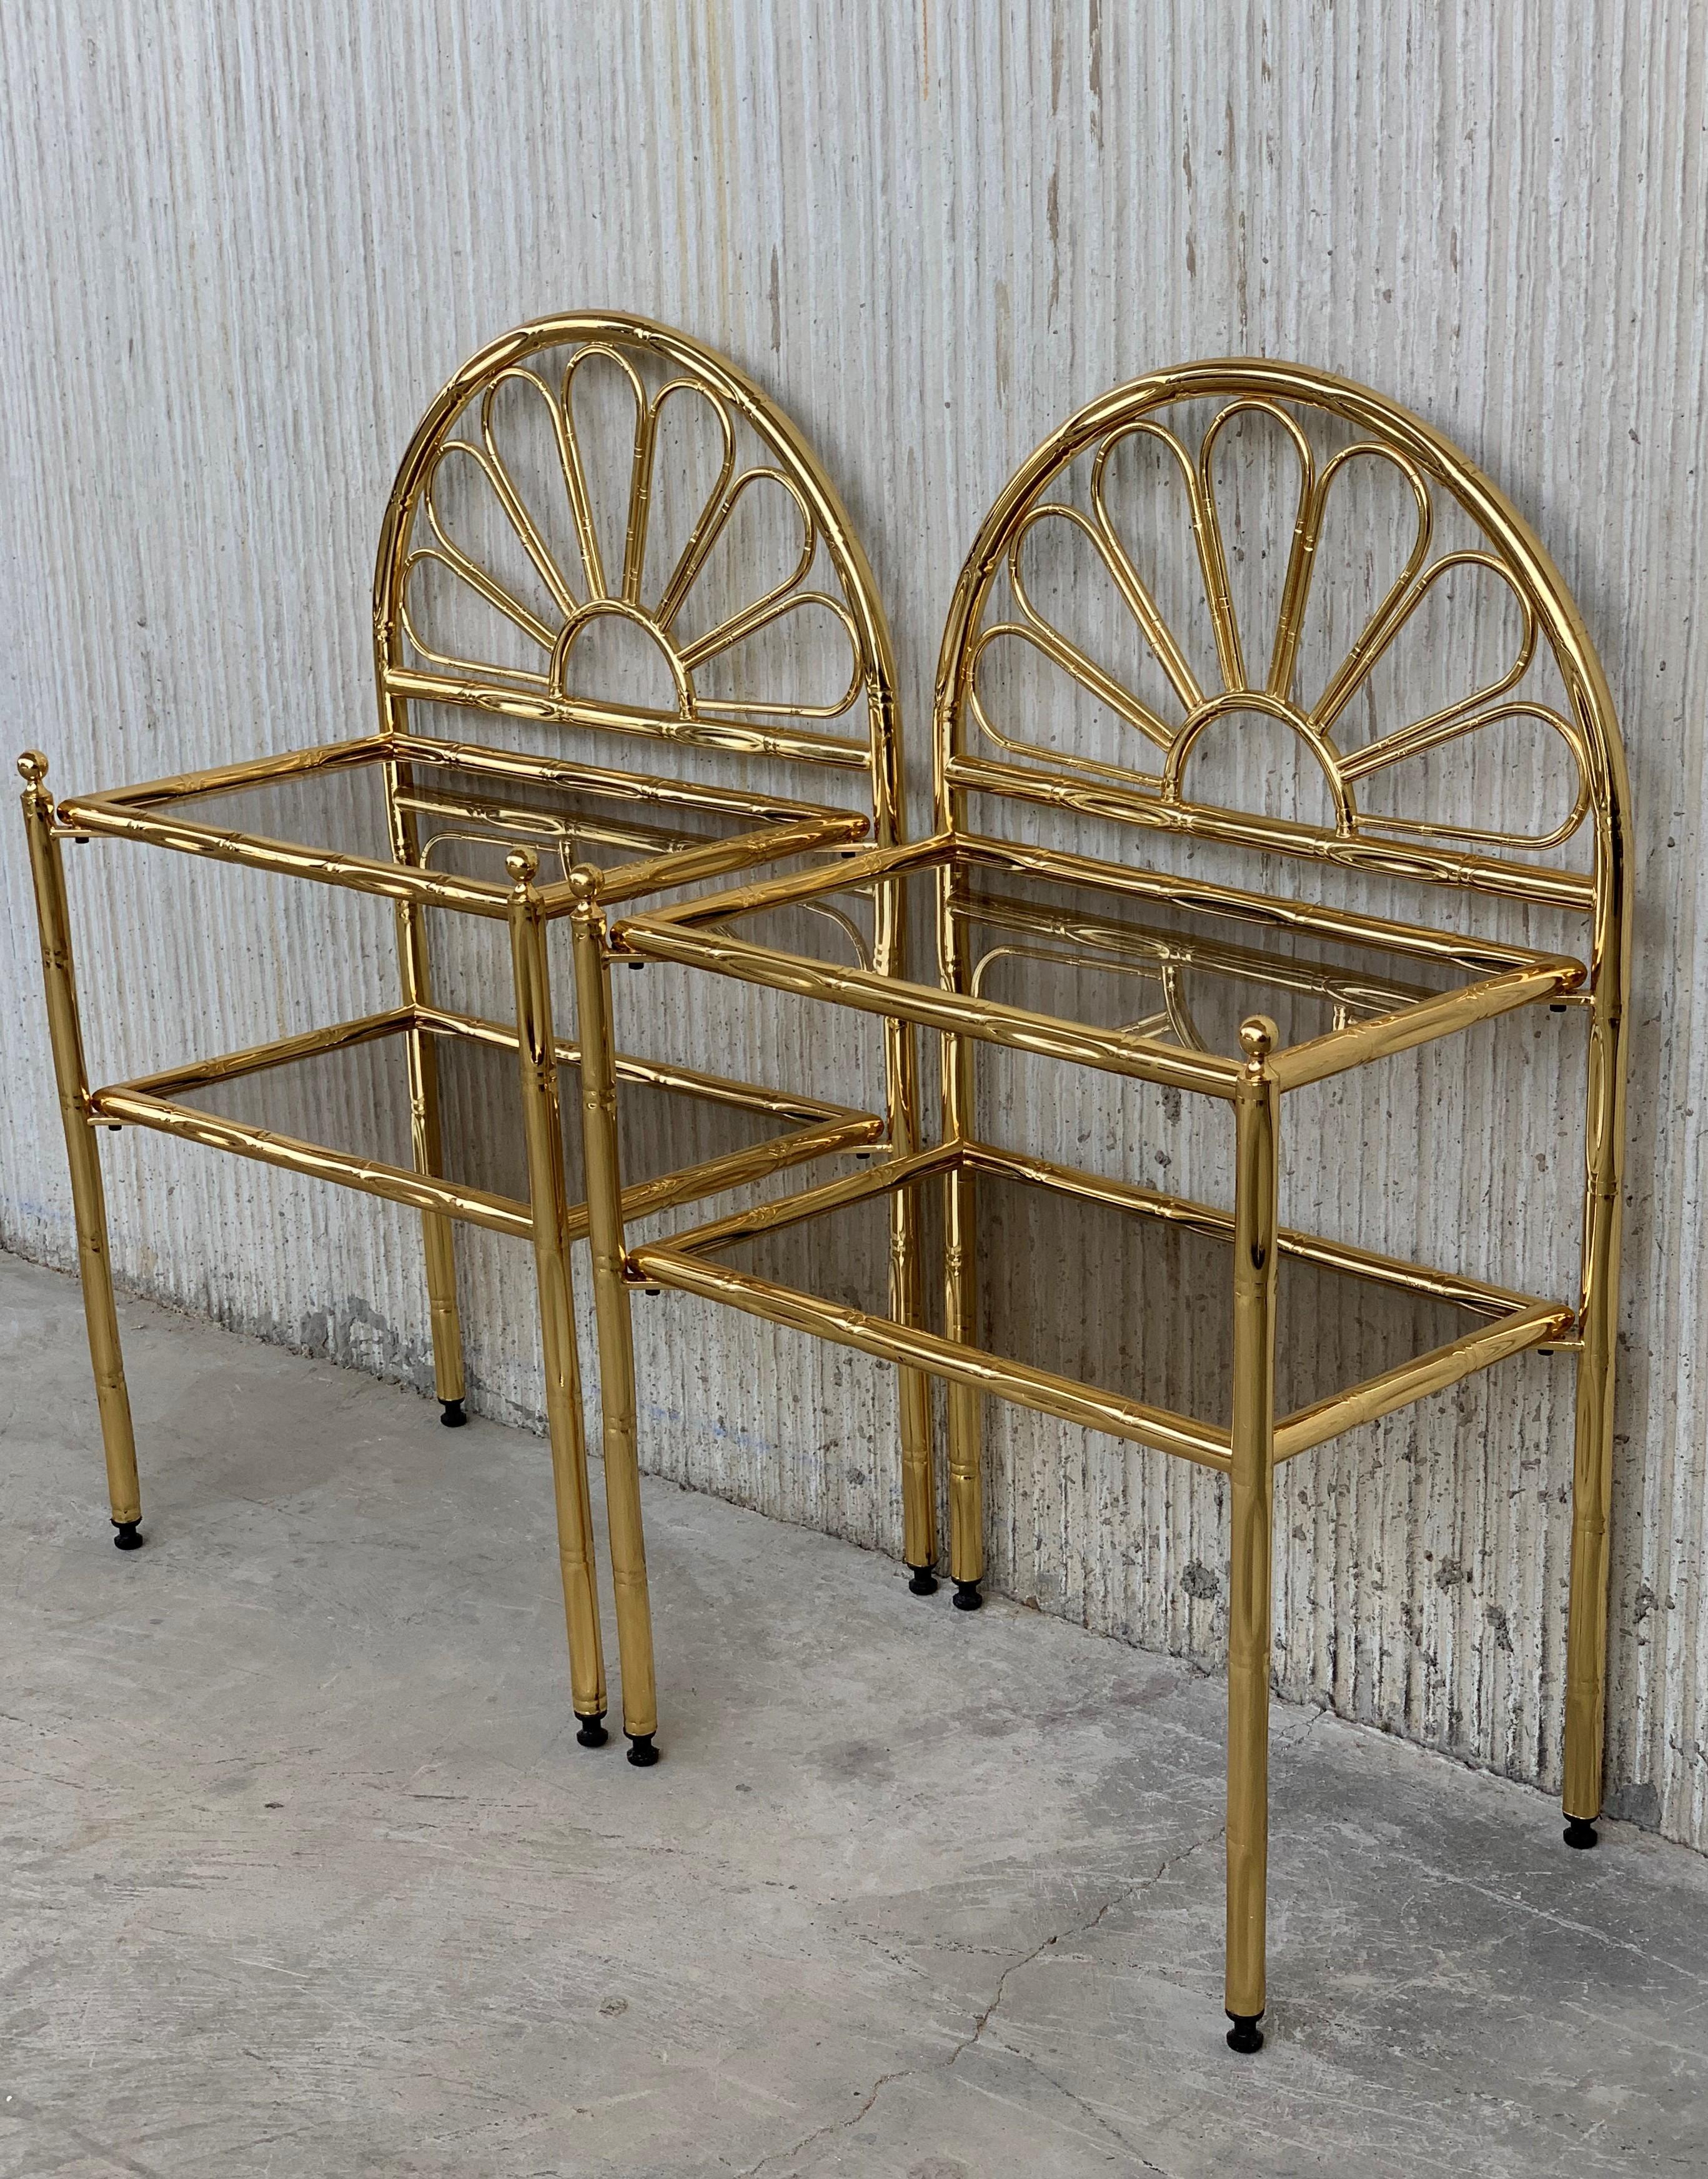 20th Century Mid-Century Modern Italian Faux Bamboo Gilt Metal NightStands with Smoked Glass